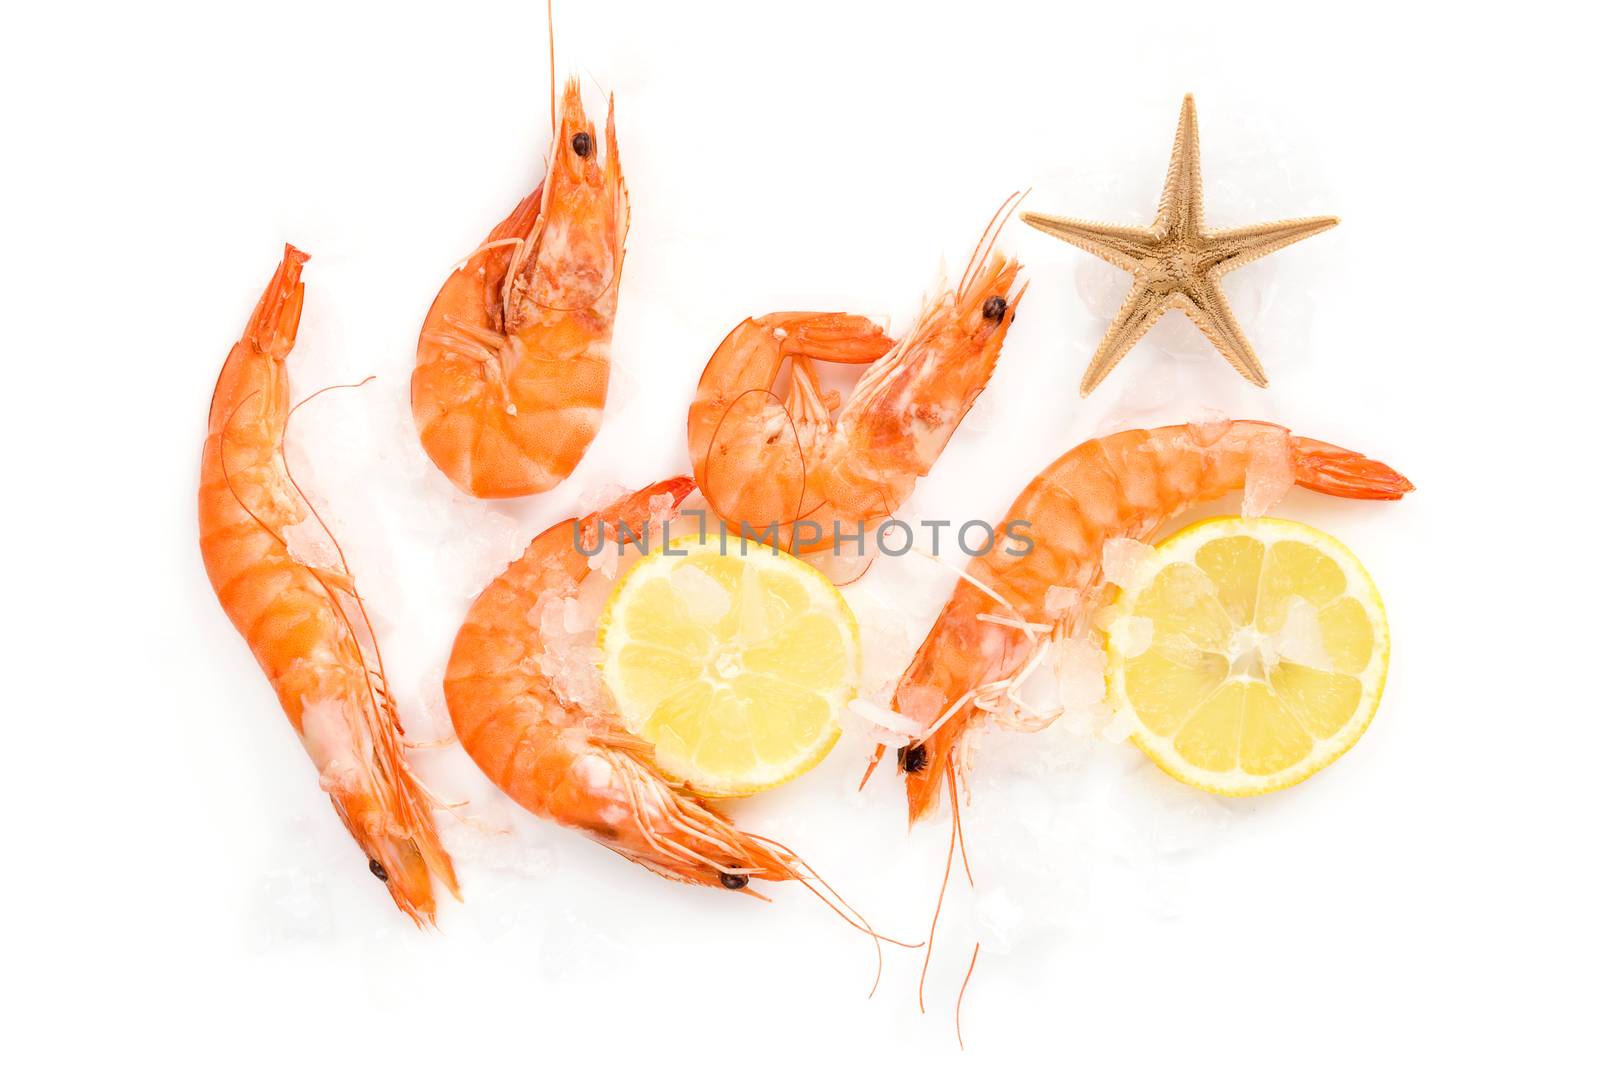 Shrimp background with copyspace. Fresh shrimp with lemon on ice on white background top view.